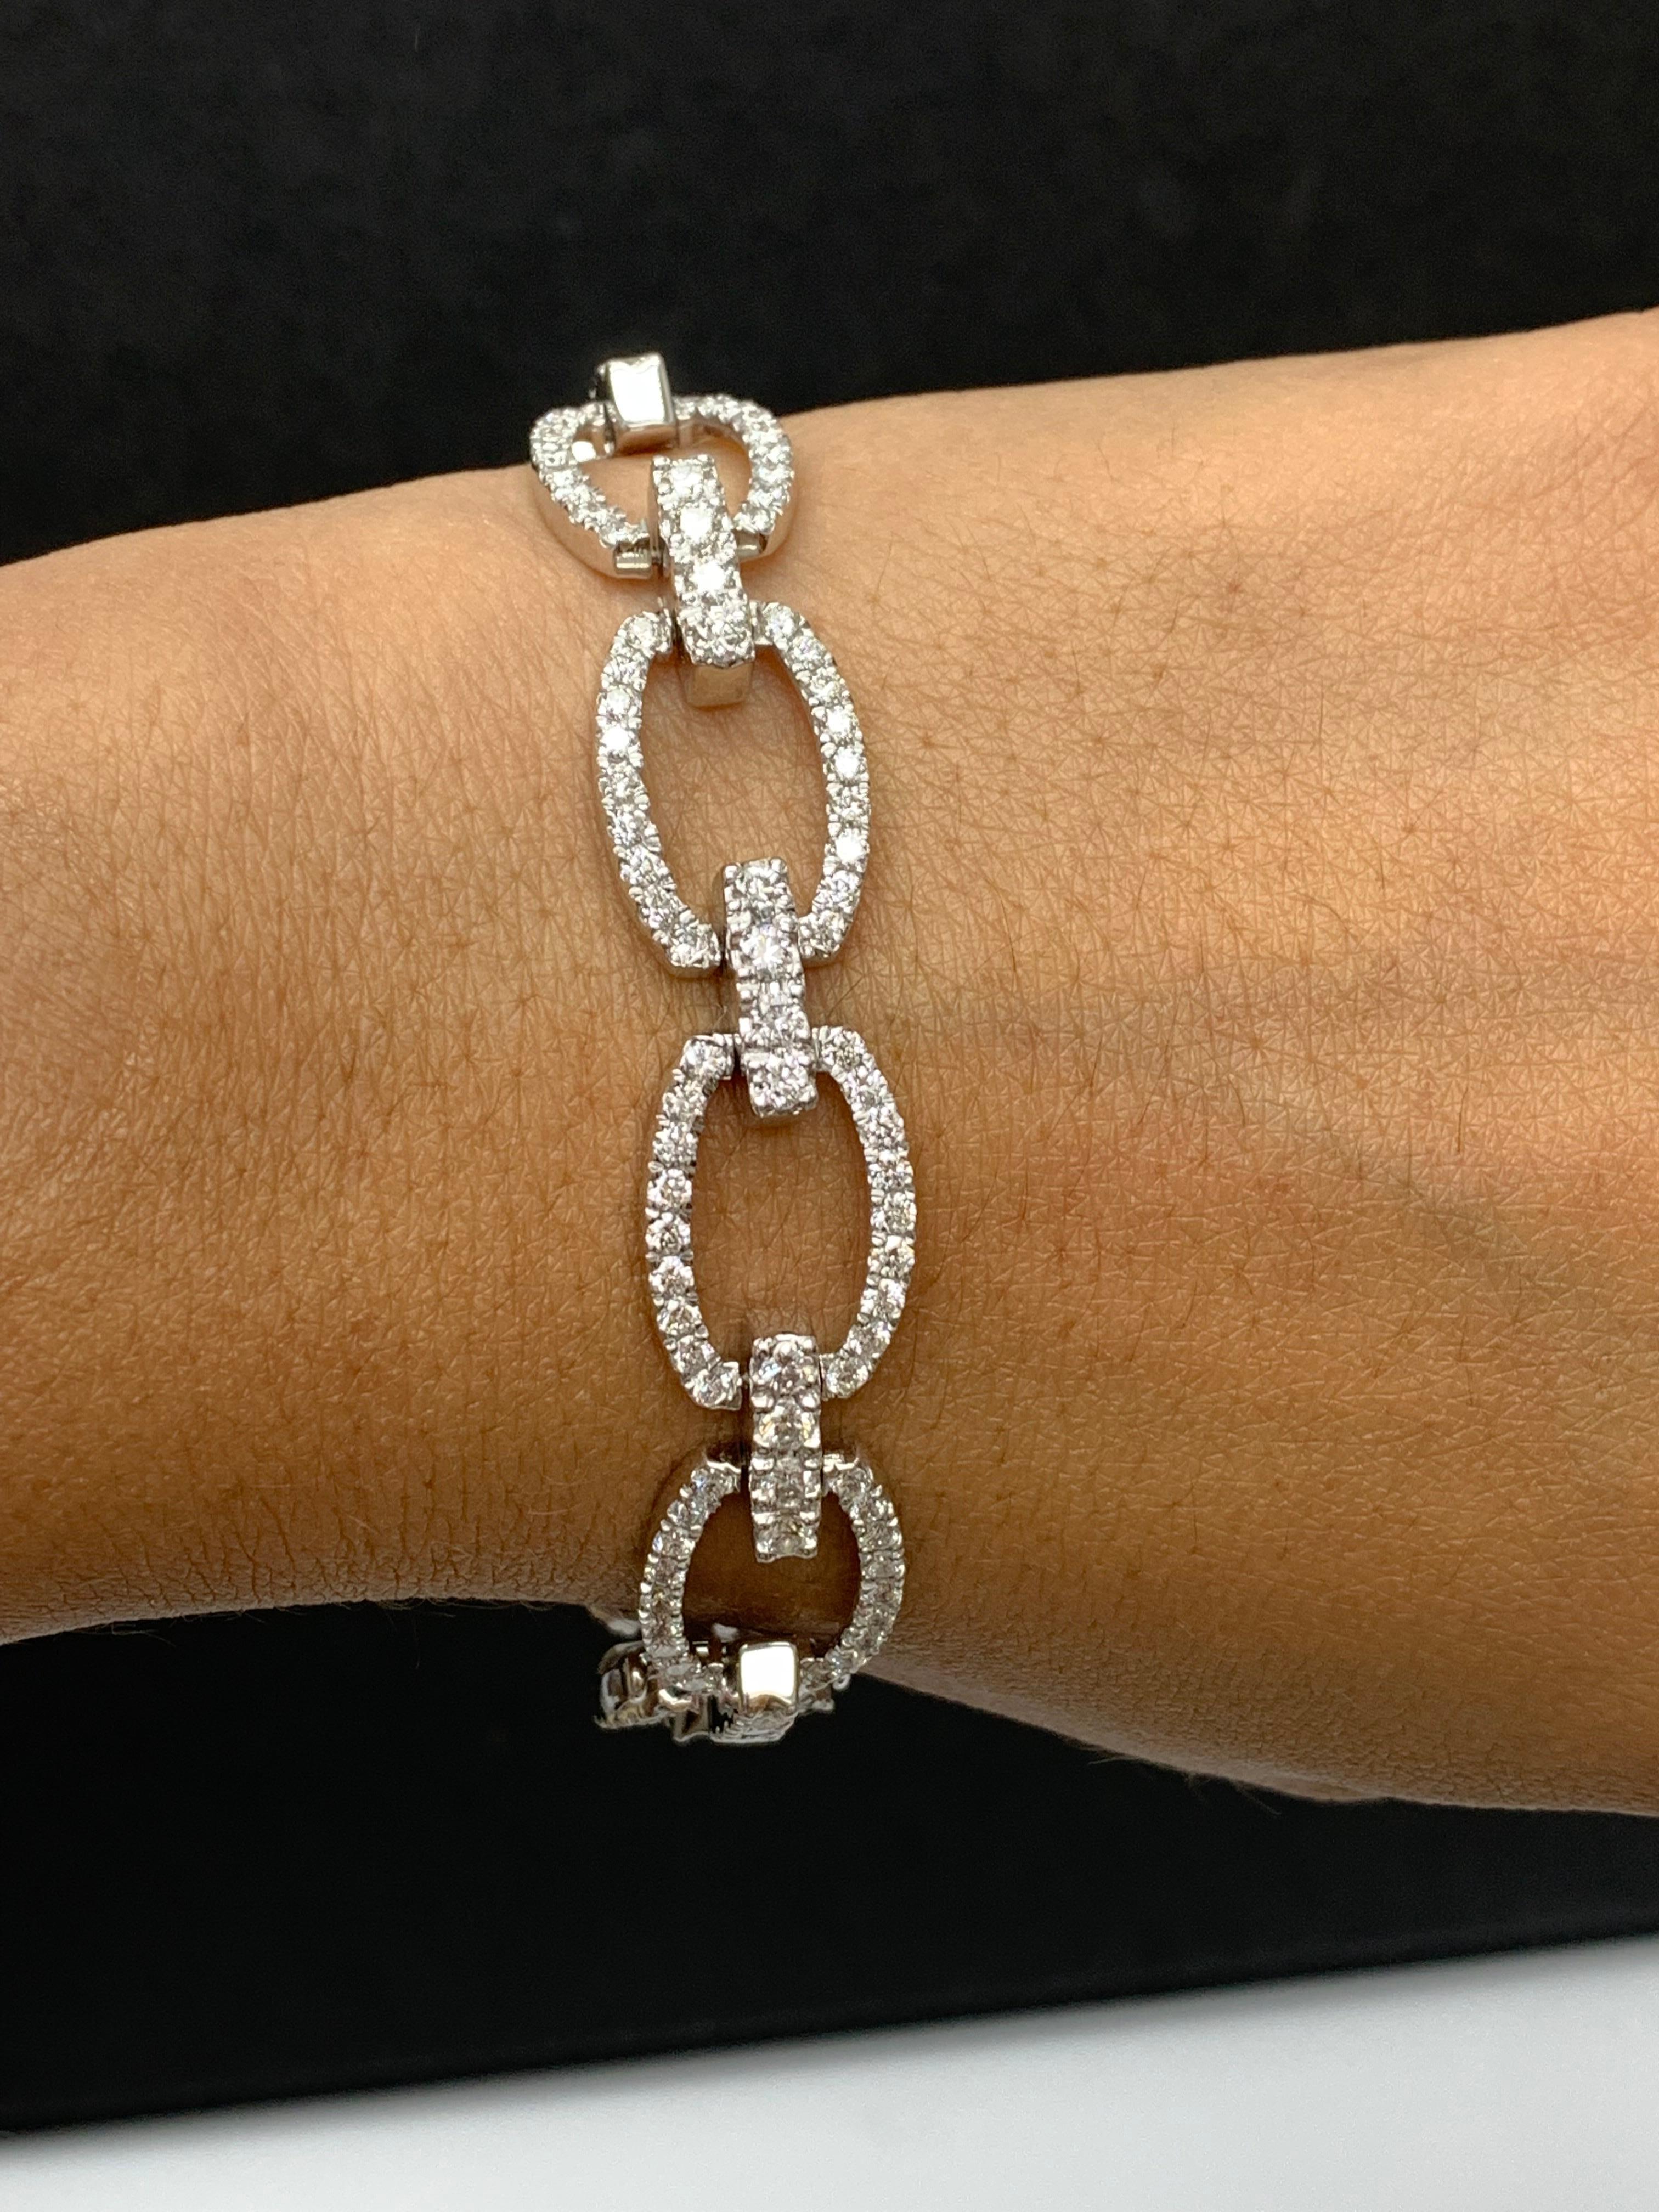 A stunning bracelet worth having. Each link on the bracelet is with 198 round brilliant diamonds with roughly G-H color and SI1 clarity.  The total weight of the 198 diamonds is 6.24 carats.

Can be made in Yellow and Rose Gold.
